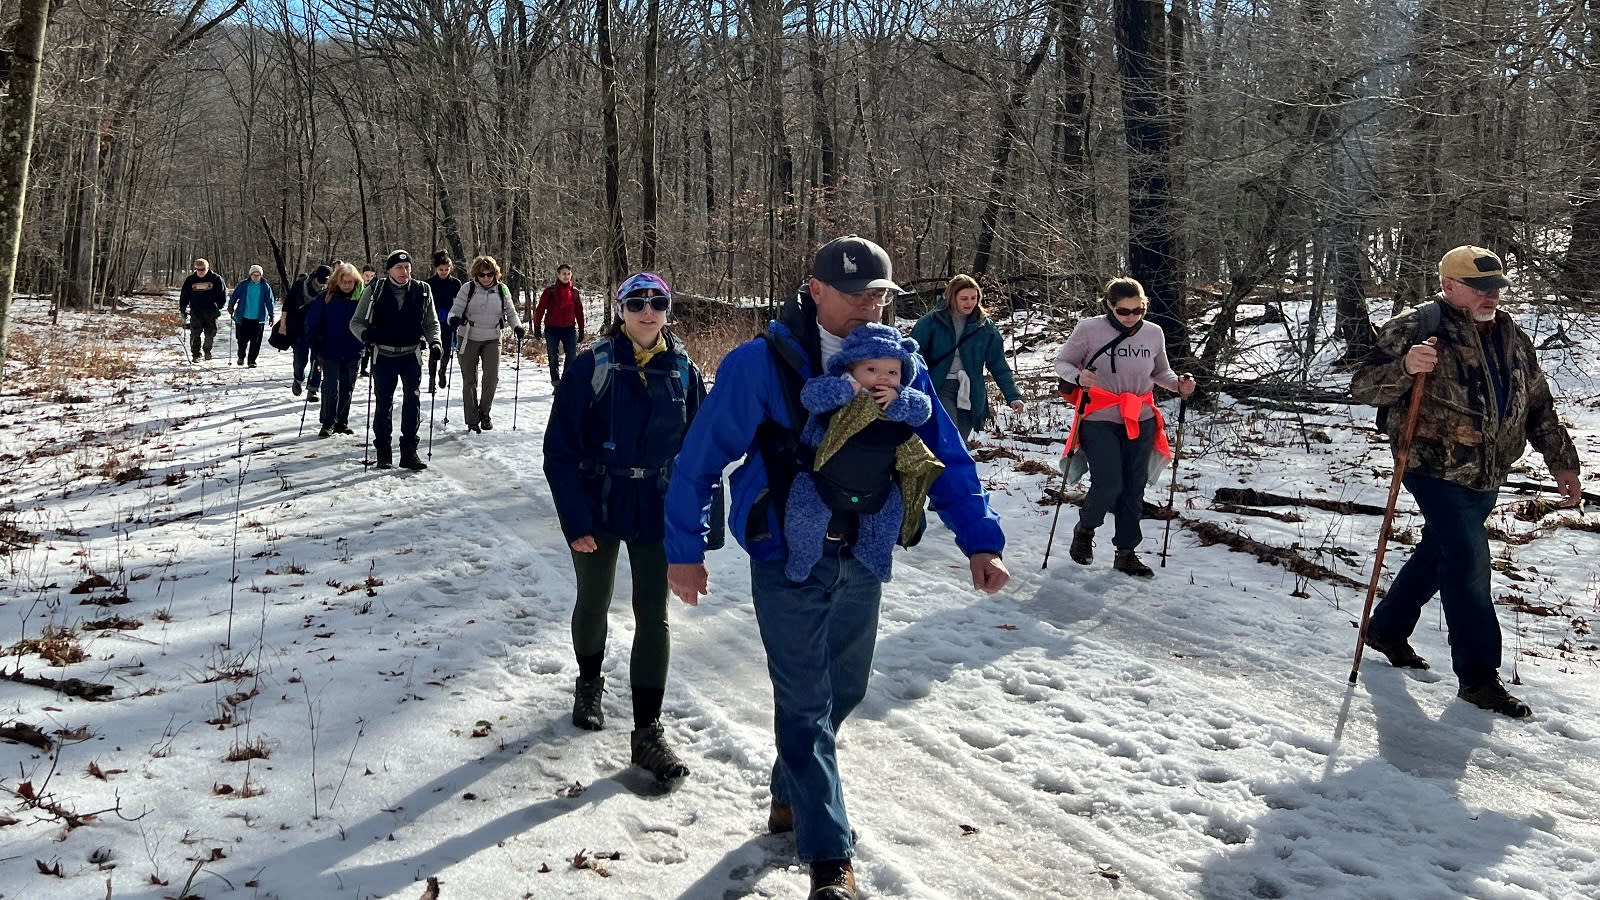 Hikers of all ages enjoyed the First Day Hike at Laurel Hill State Park.